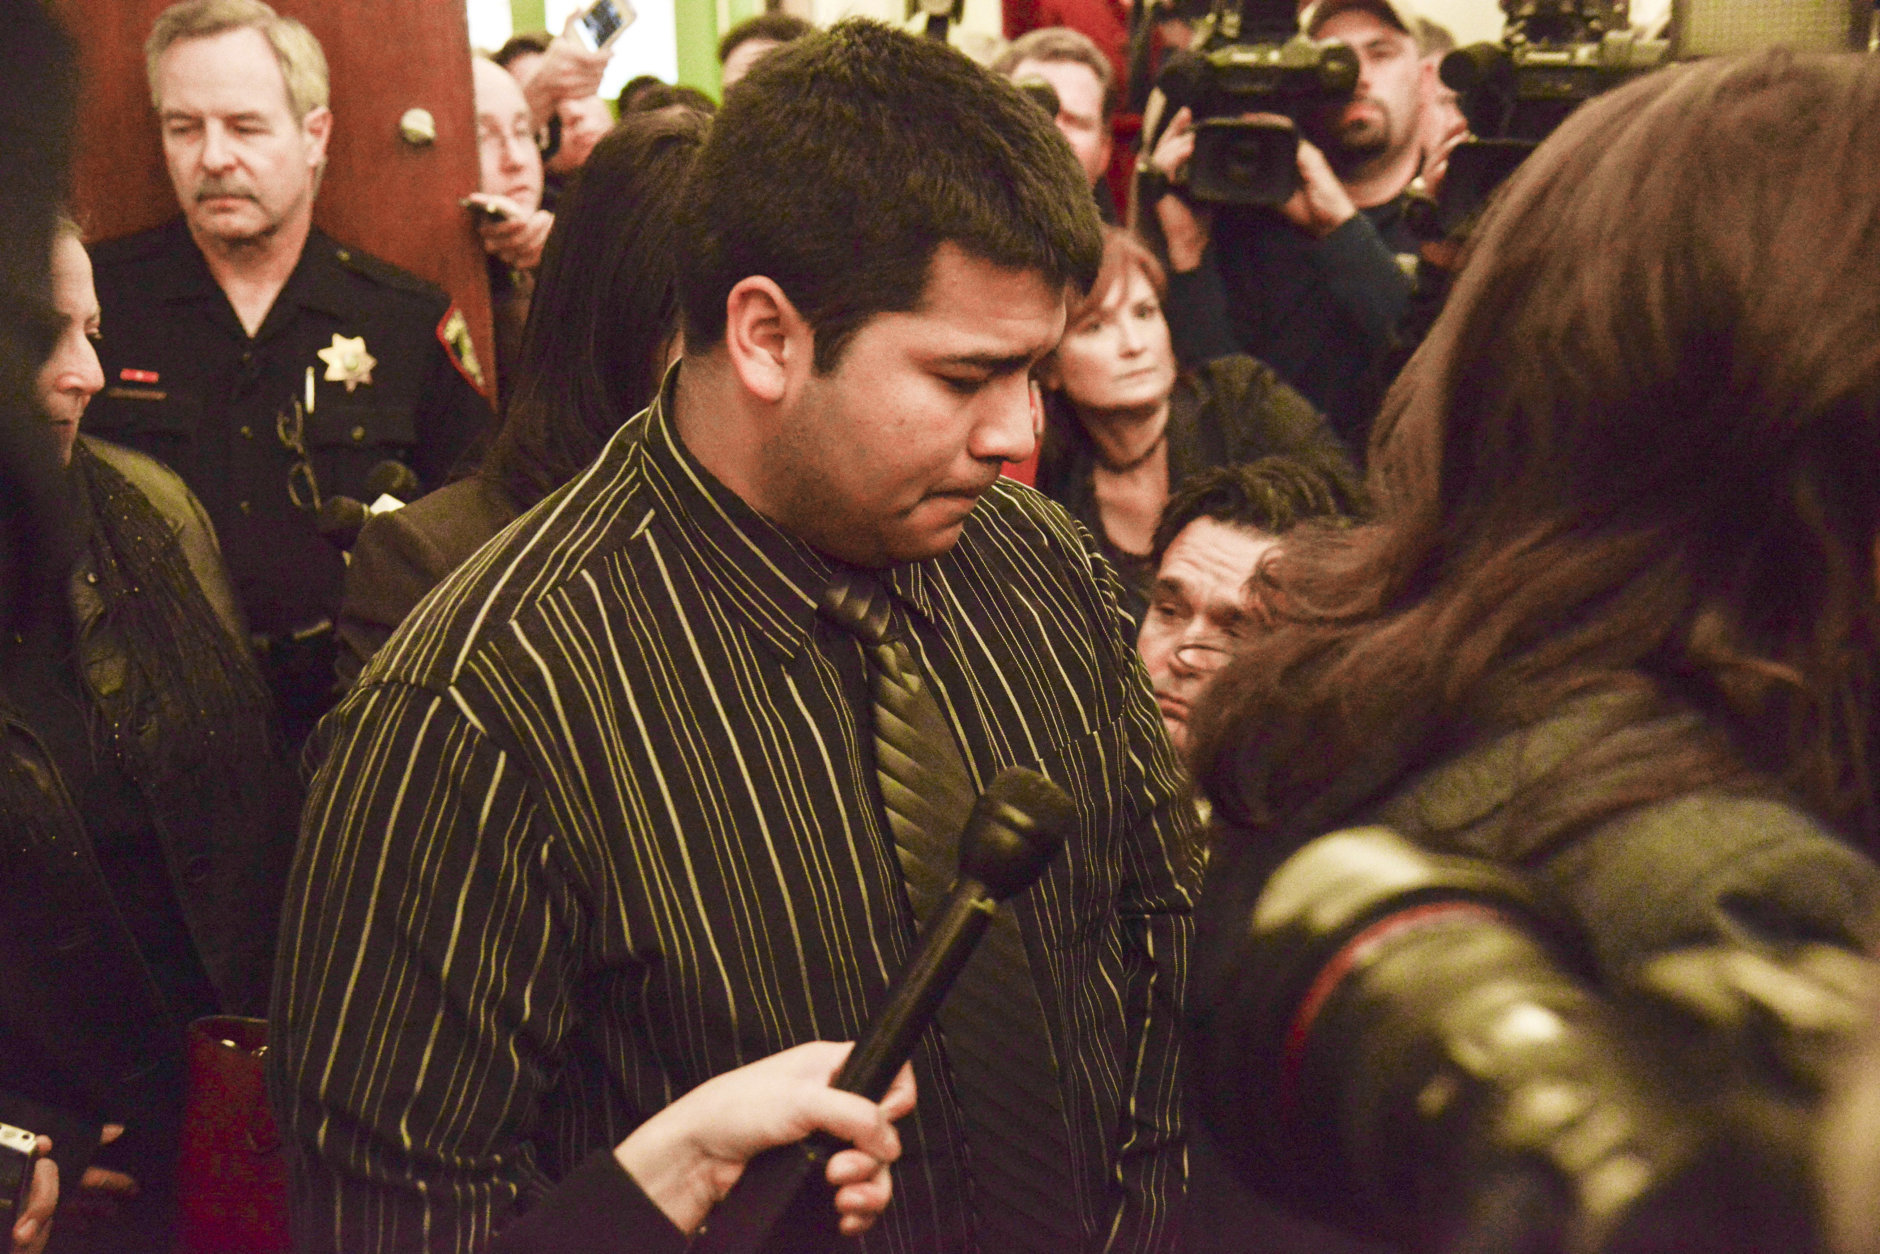 FILE - In this Jan. 24, 2014 file photo, Erick Munoz, husband of Marlise Munoz, is escorted out of court by his attorney Heather L. King, right, in Fort Worth, Texas.  Before Marlise Munoz, a pregnant brain-dead Texas woman was taken off life support over the weekend at the end of a long legal battle, her husband said he decided to name what would have been the couple's second child. Erick Munoz said Monday, Jan. 27,  he gave the 23-week-old fetus the name Nicole, the middle name of his late wife. He would not say why he chose to name the fetus. (AP Photo/Tim Sharp, File)